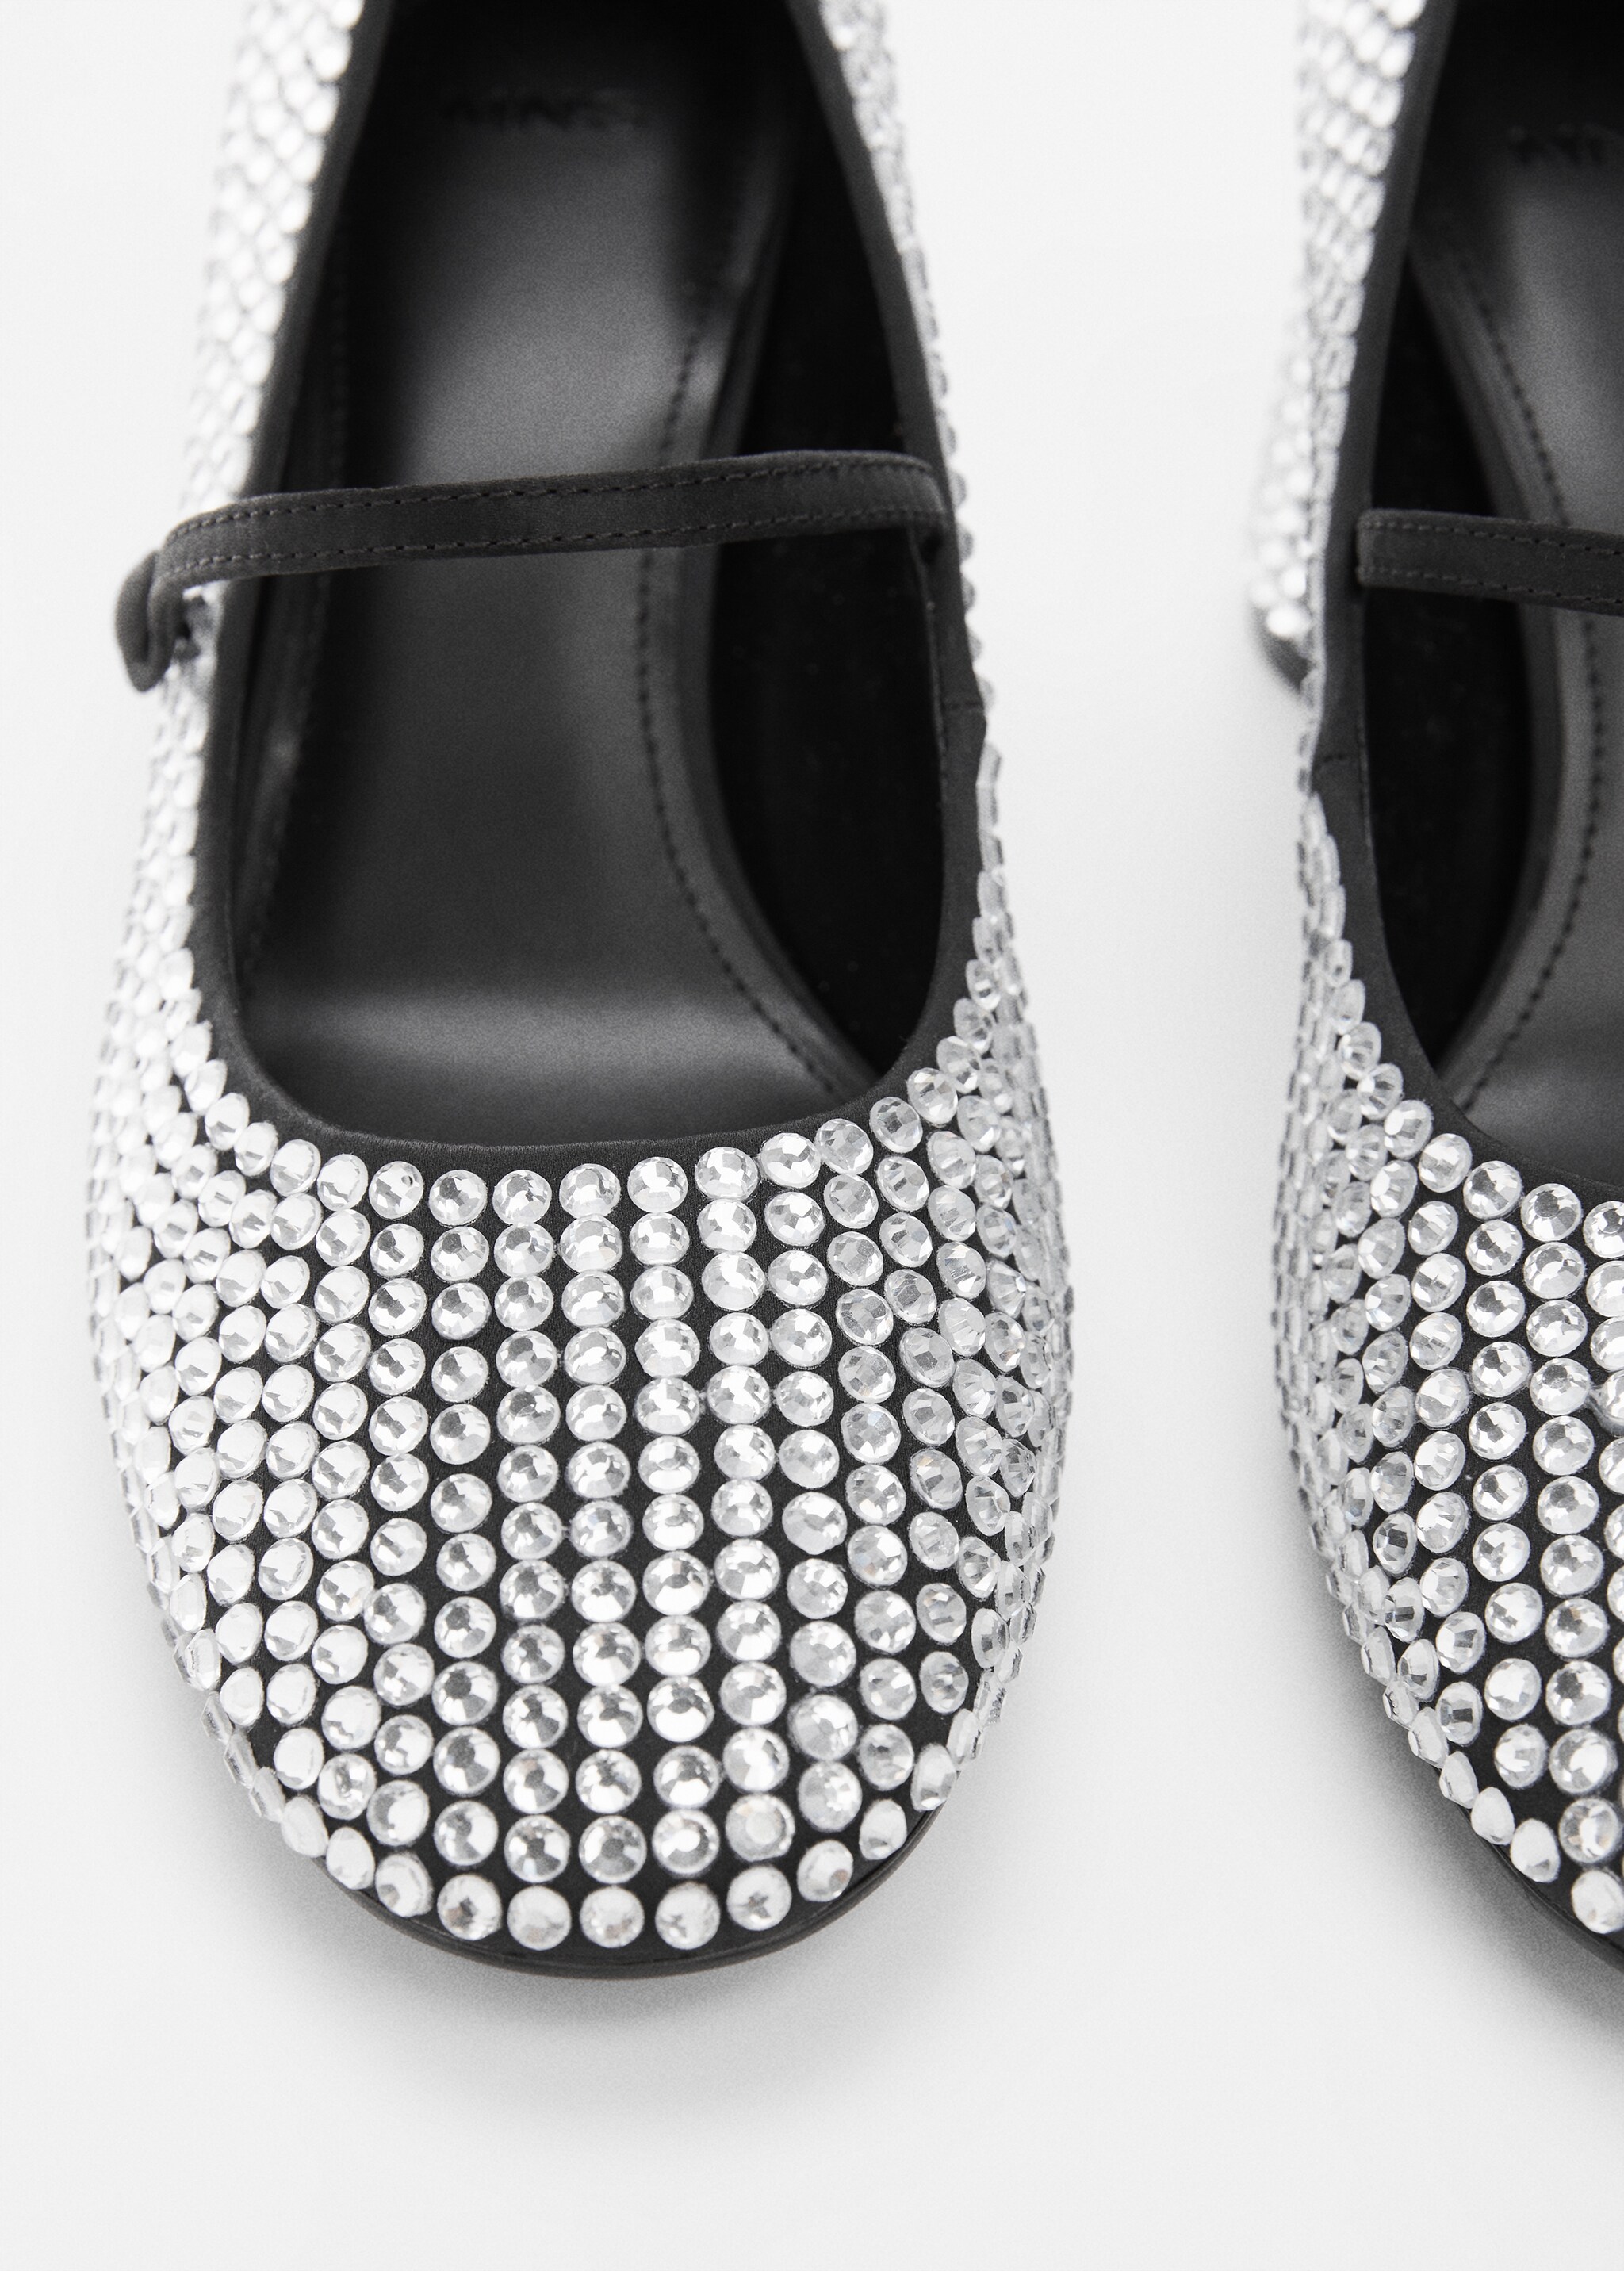 Shoes with shiny heels - Details of the article 2